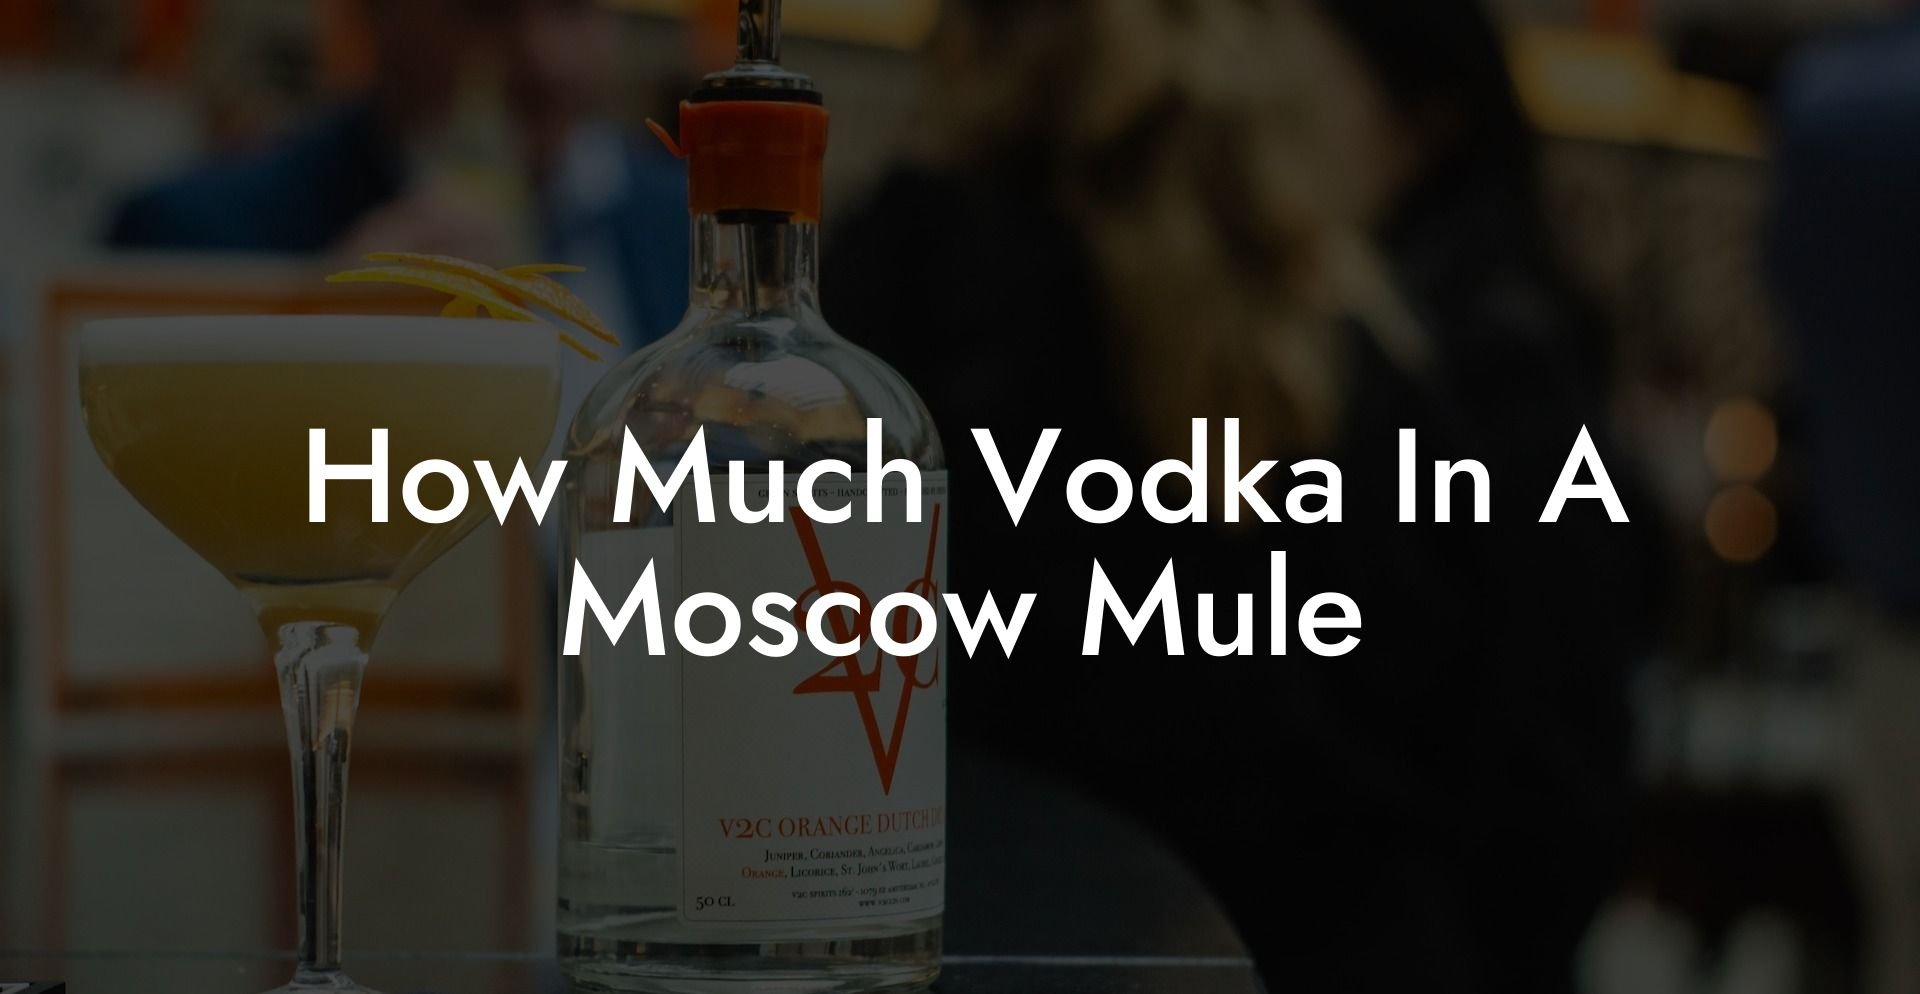 How Much Vodka In A Moscow Mule